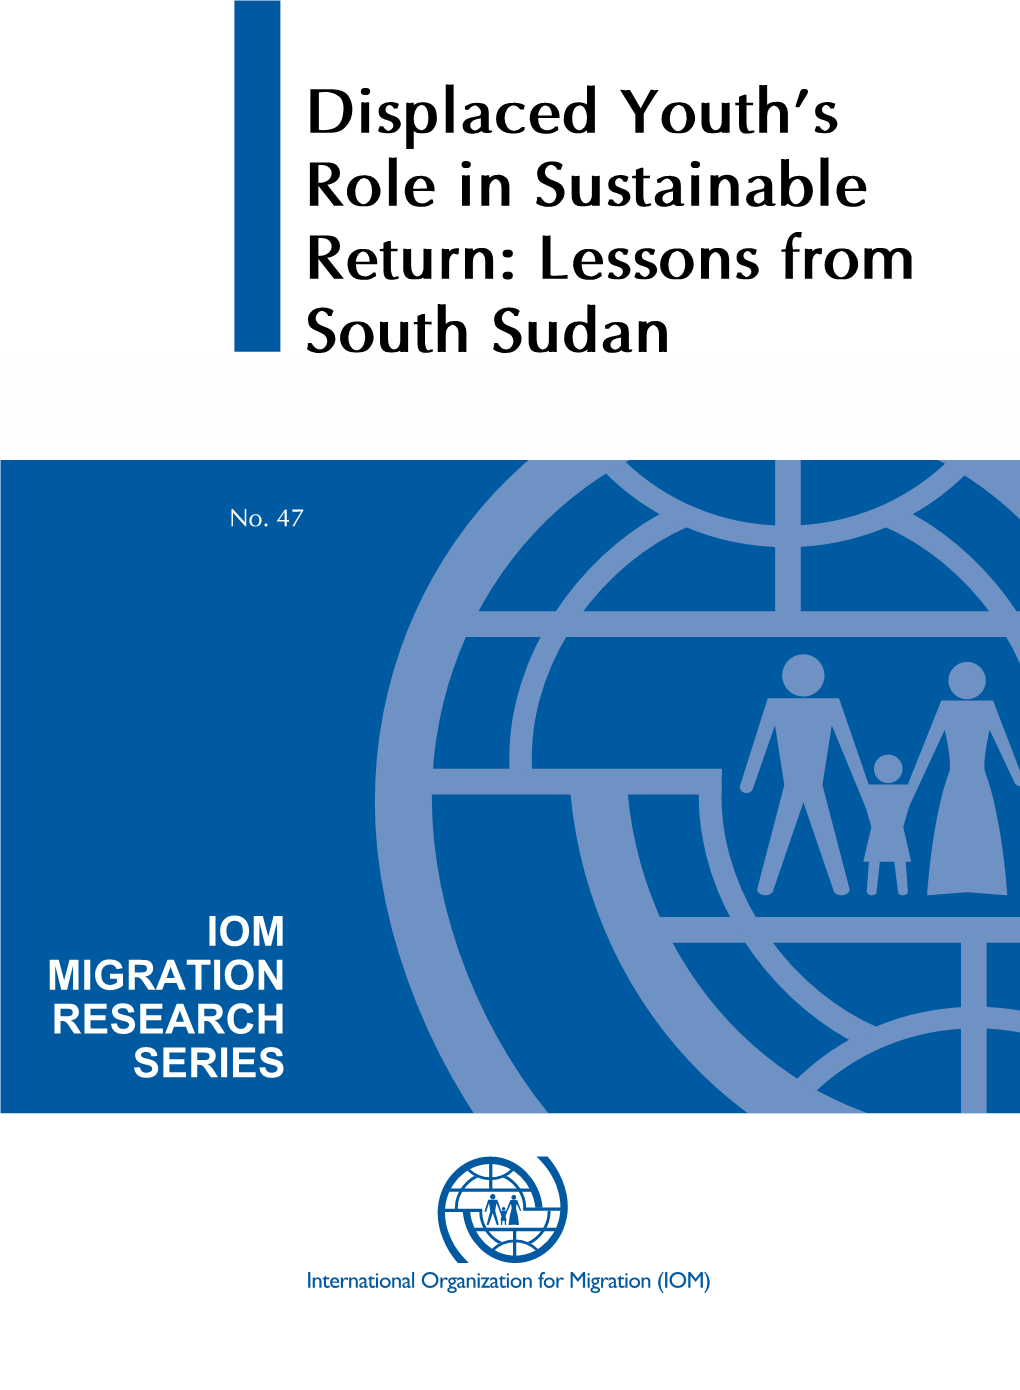 Lessons from South Sudan